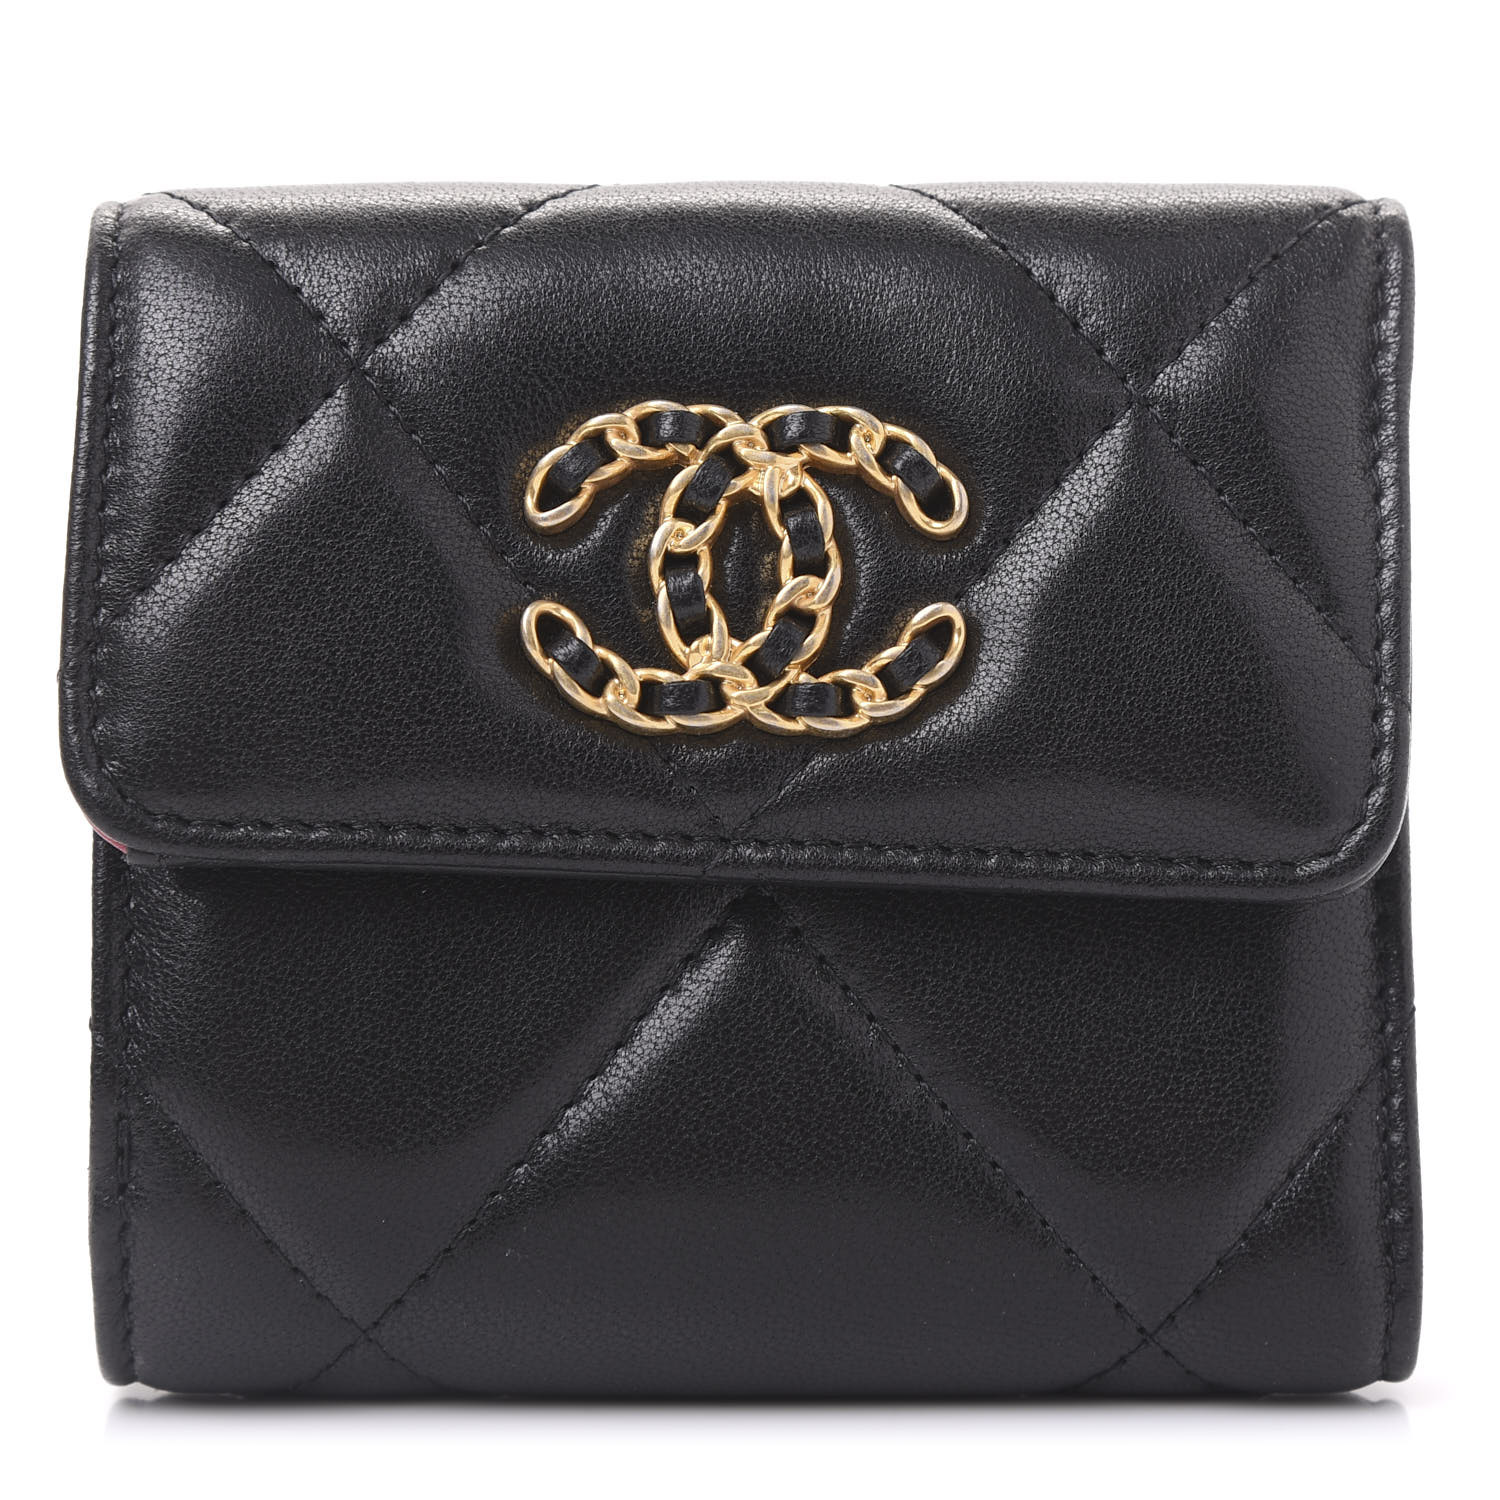 CHANEL Lambskin Quilted Chanel 19 Small Flap Wallet Black 599635